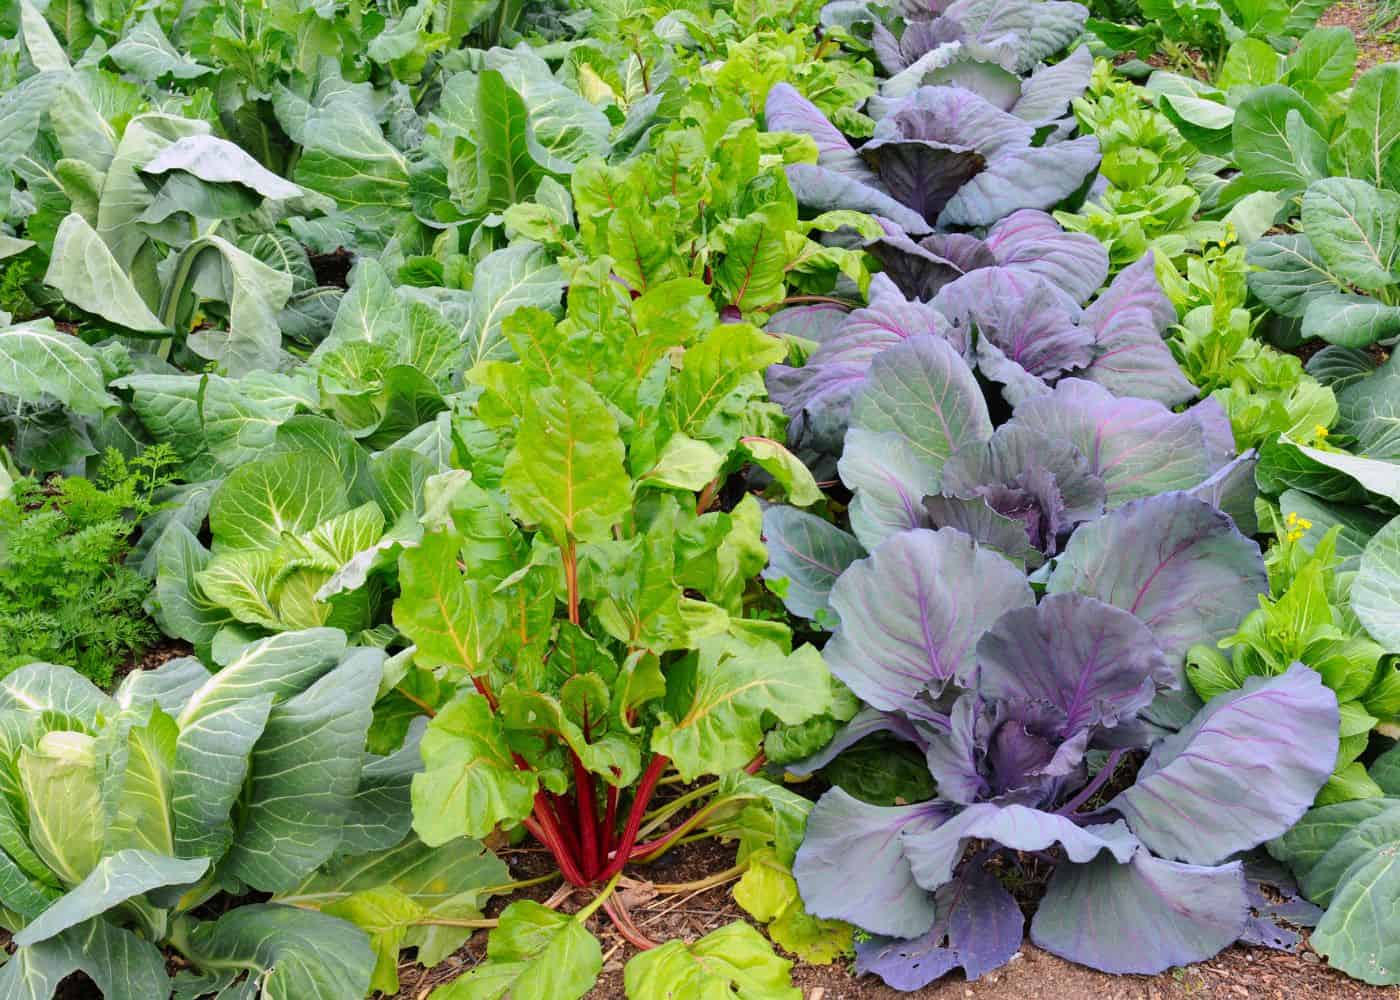 Garden with rows of cool season veggies - cabbage, carrots, chard, spinach